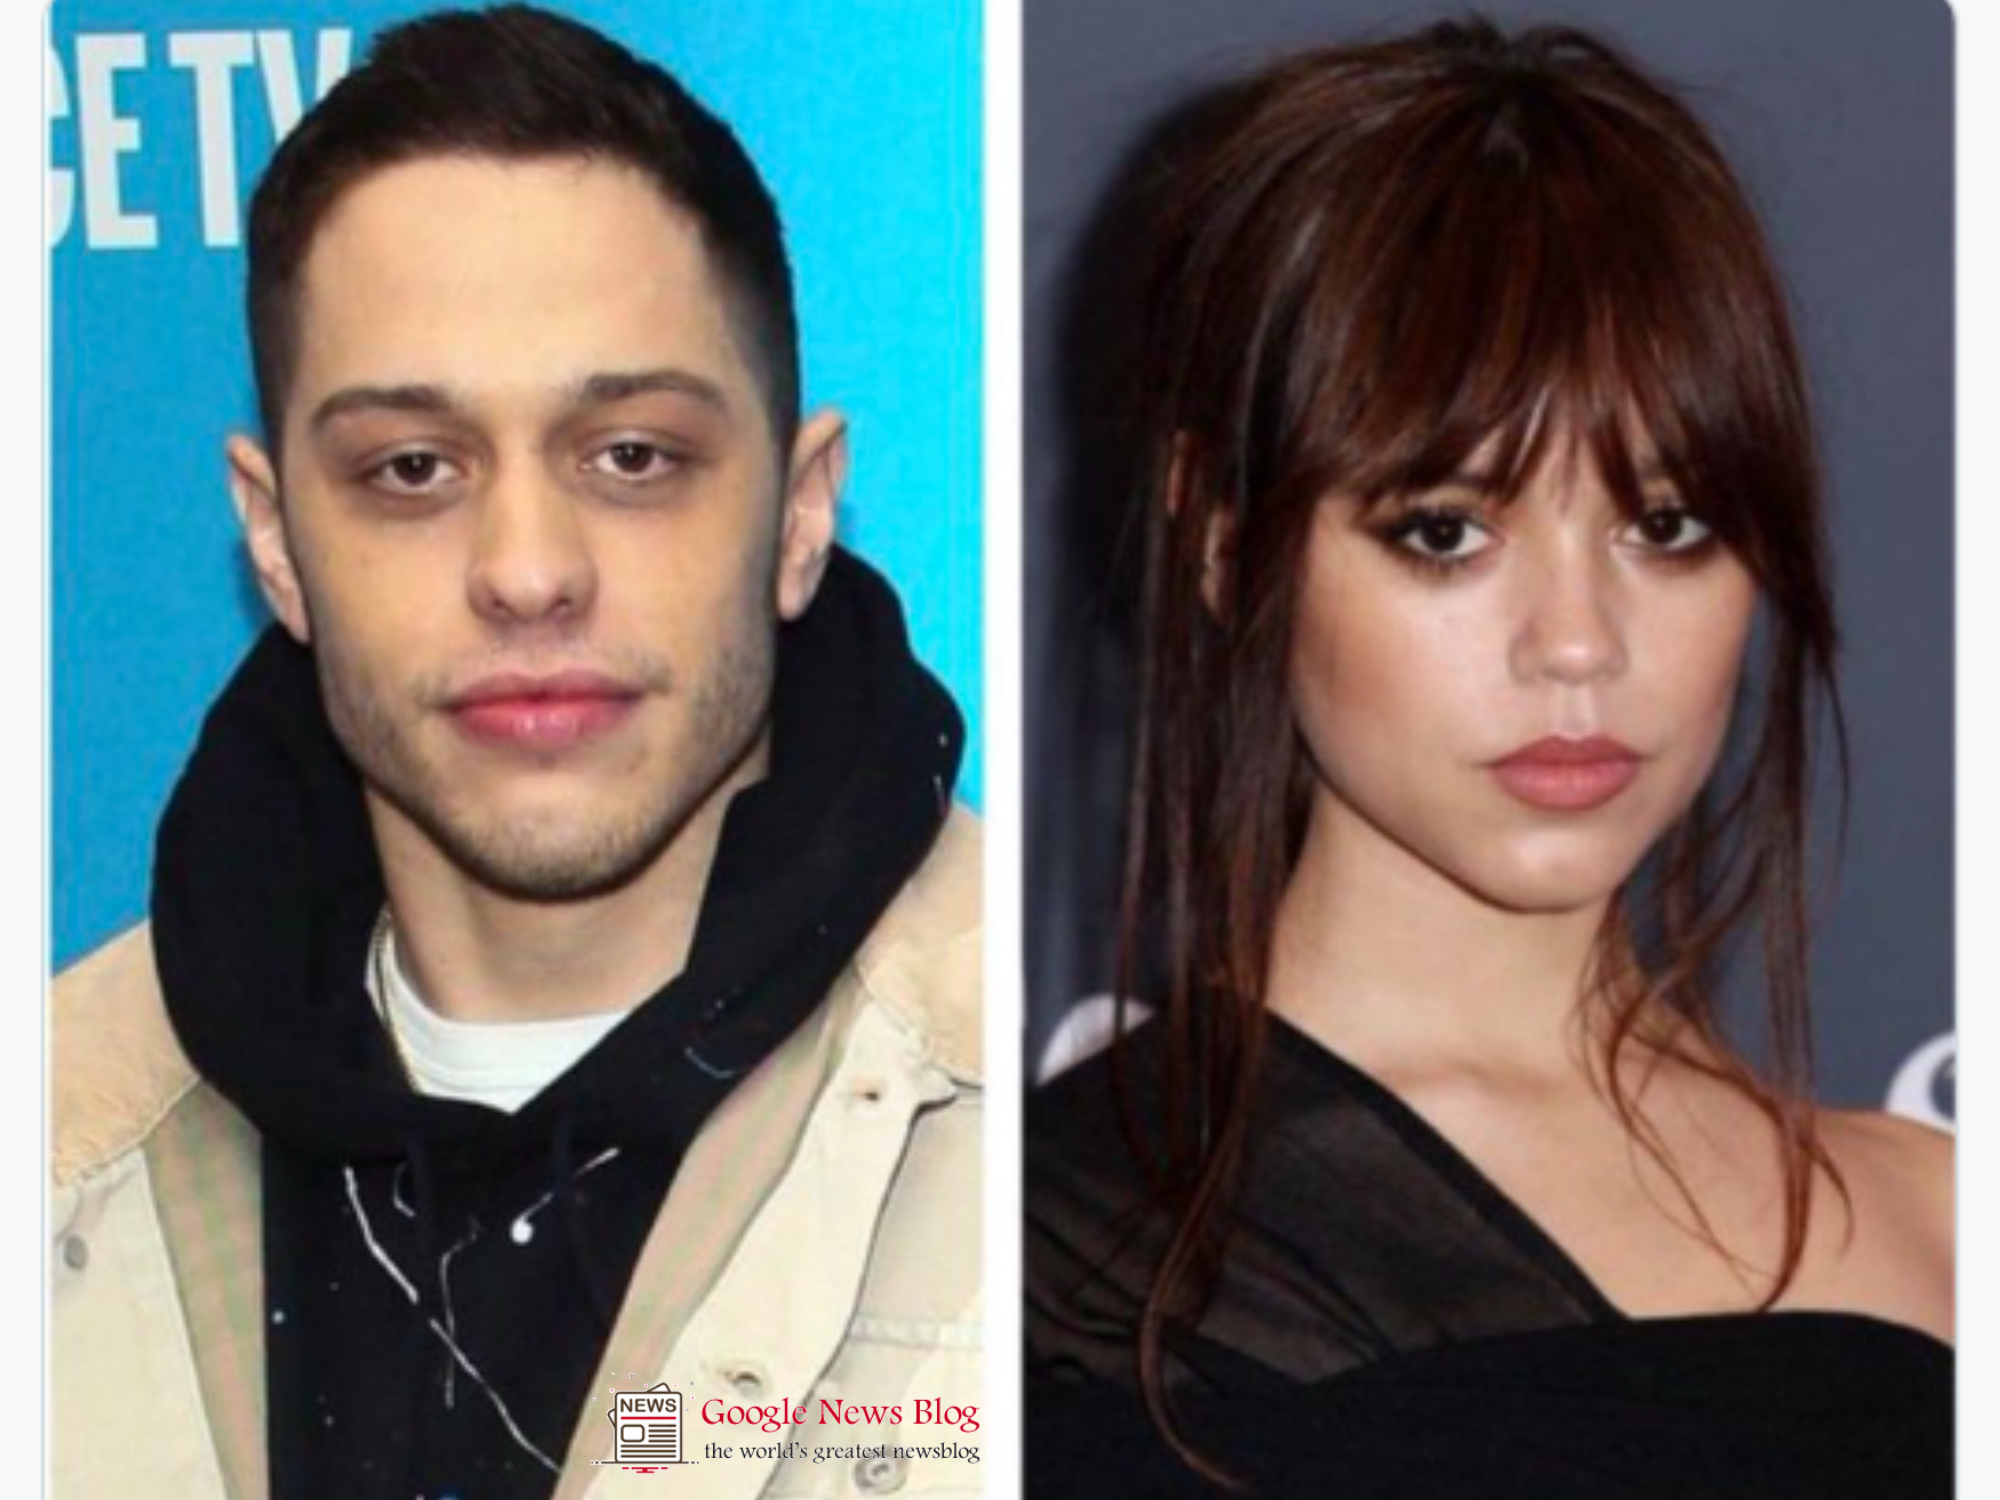 You can find out where the pete davidson jenna ortega relationship rumours actually come from